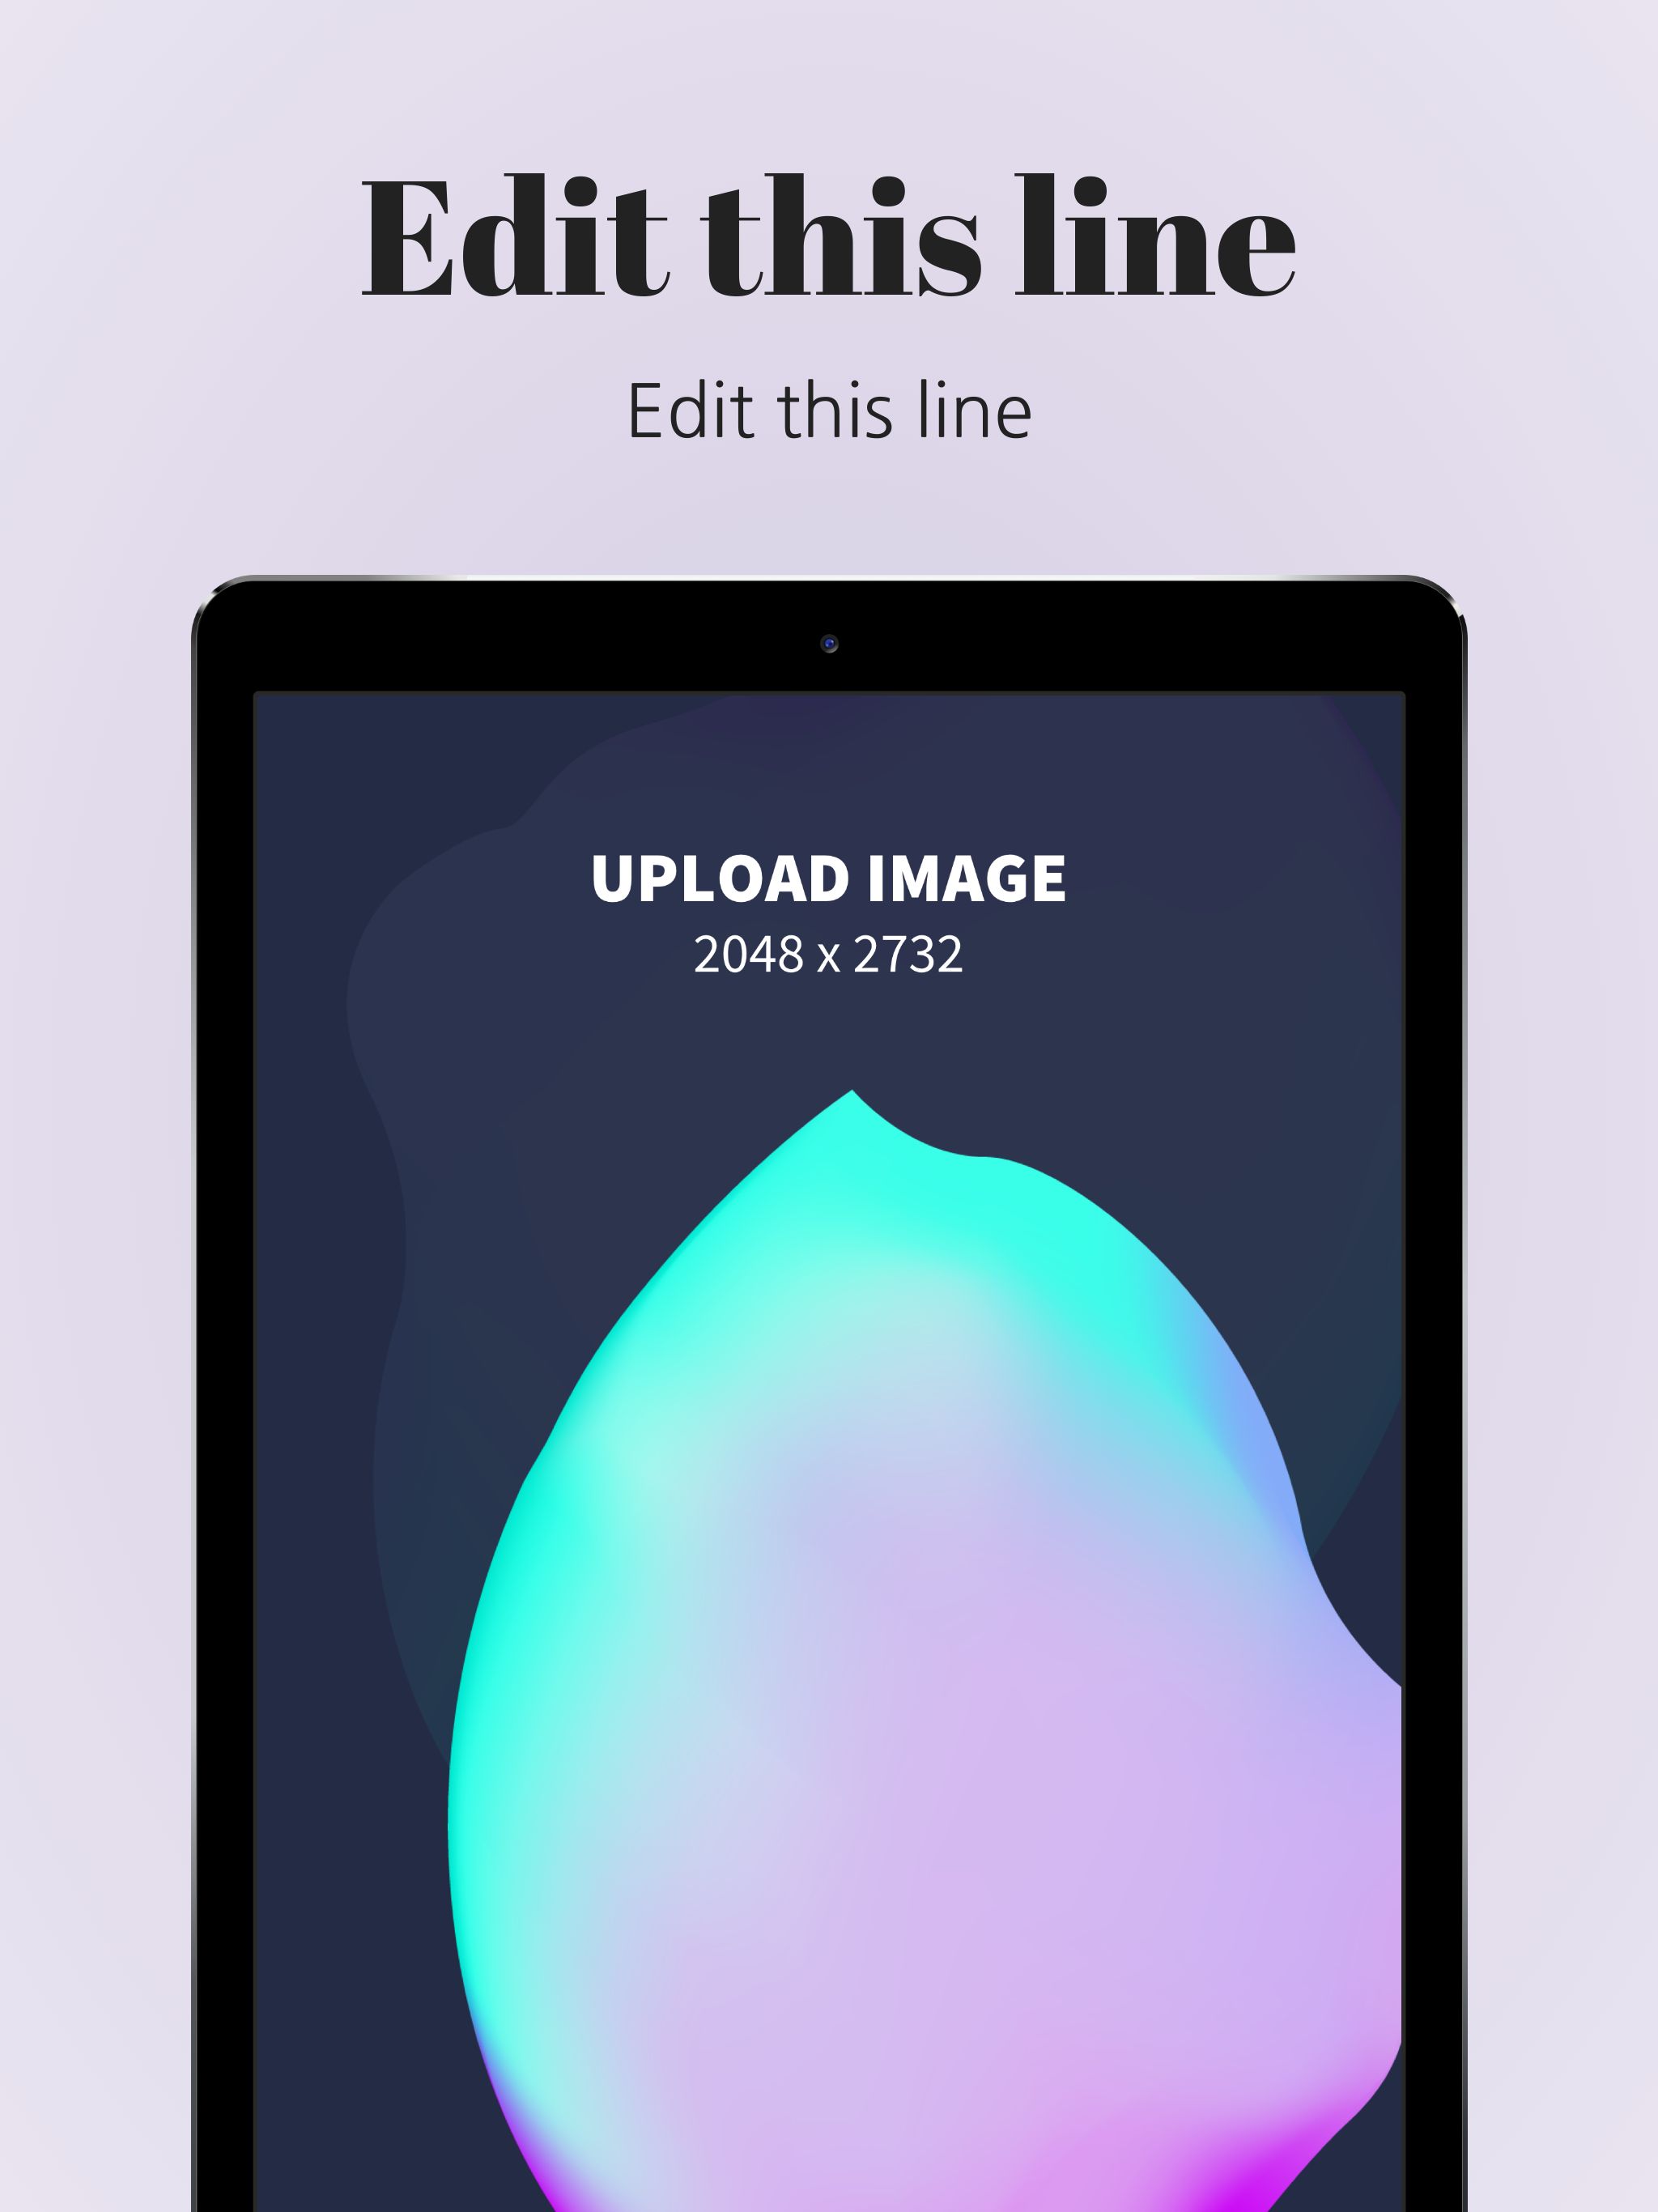 iPad Pro Screenshot 2 template. Quickly edit text, colors, images, and more for free.